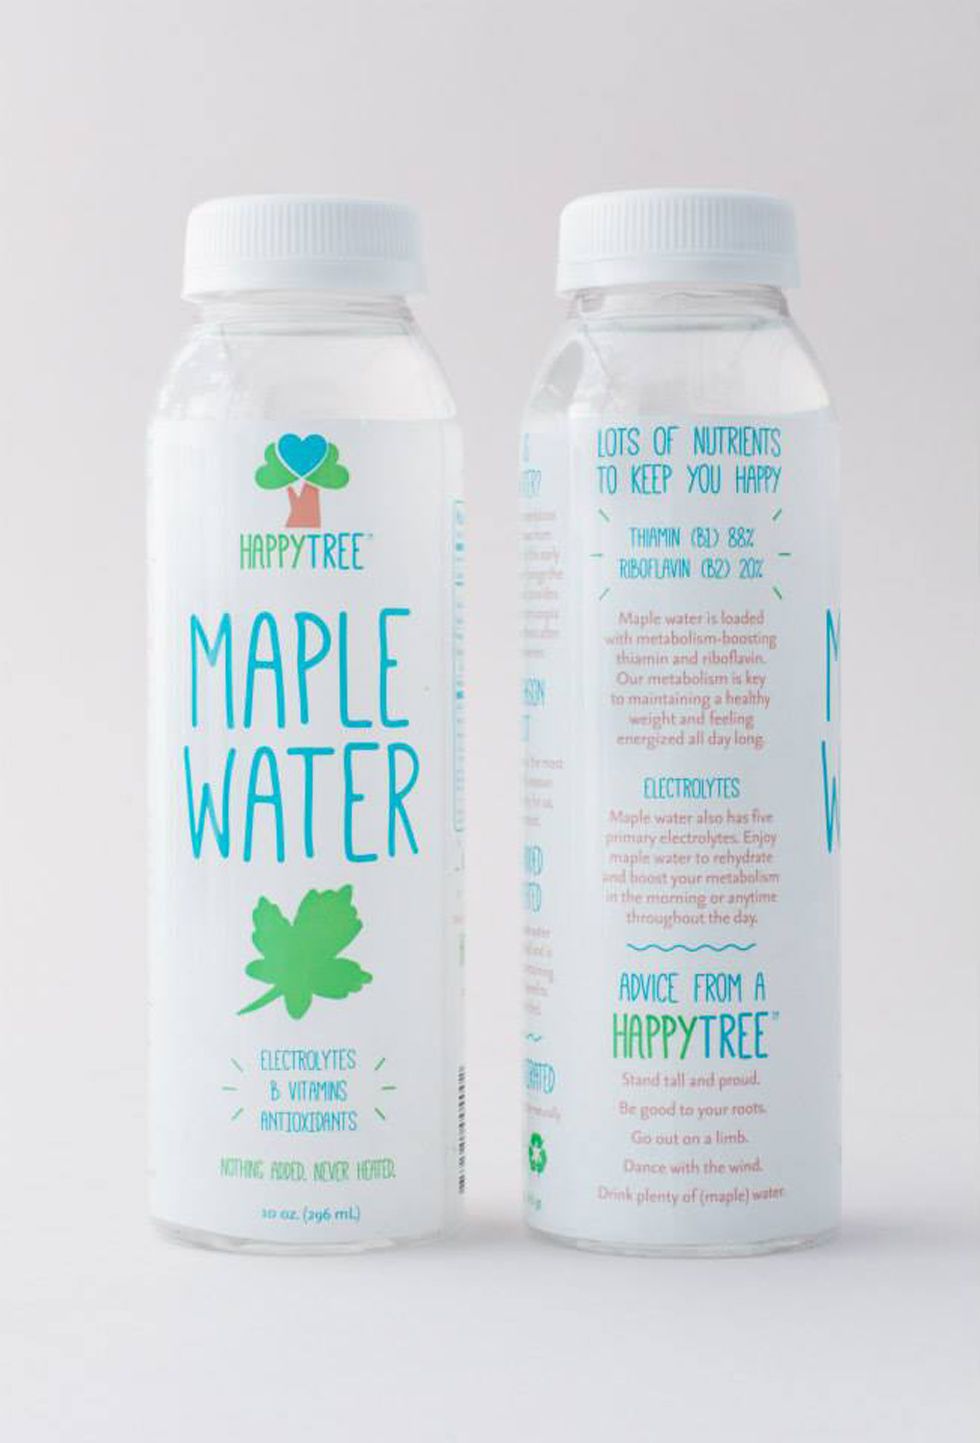 maple water, 10 best carbs to lose weight